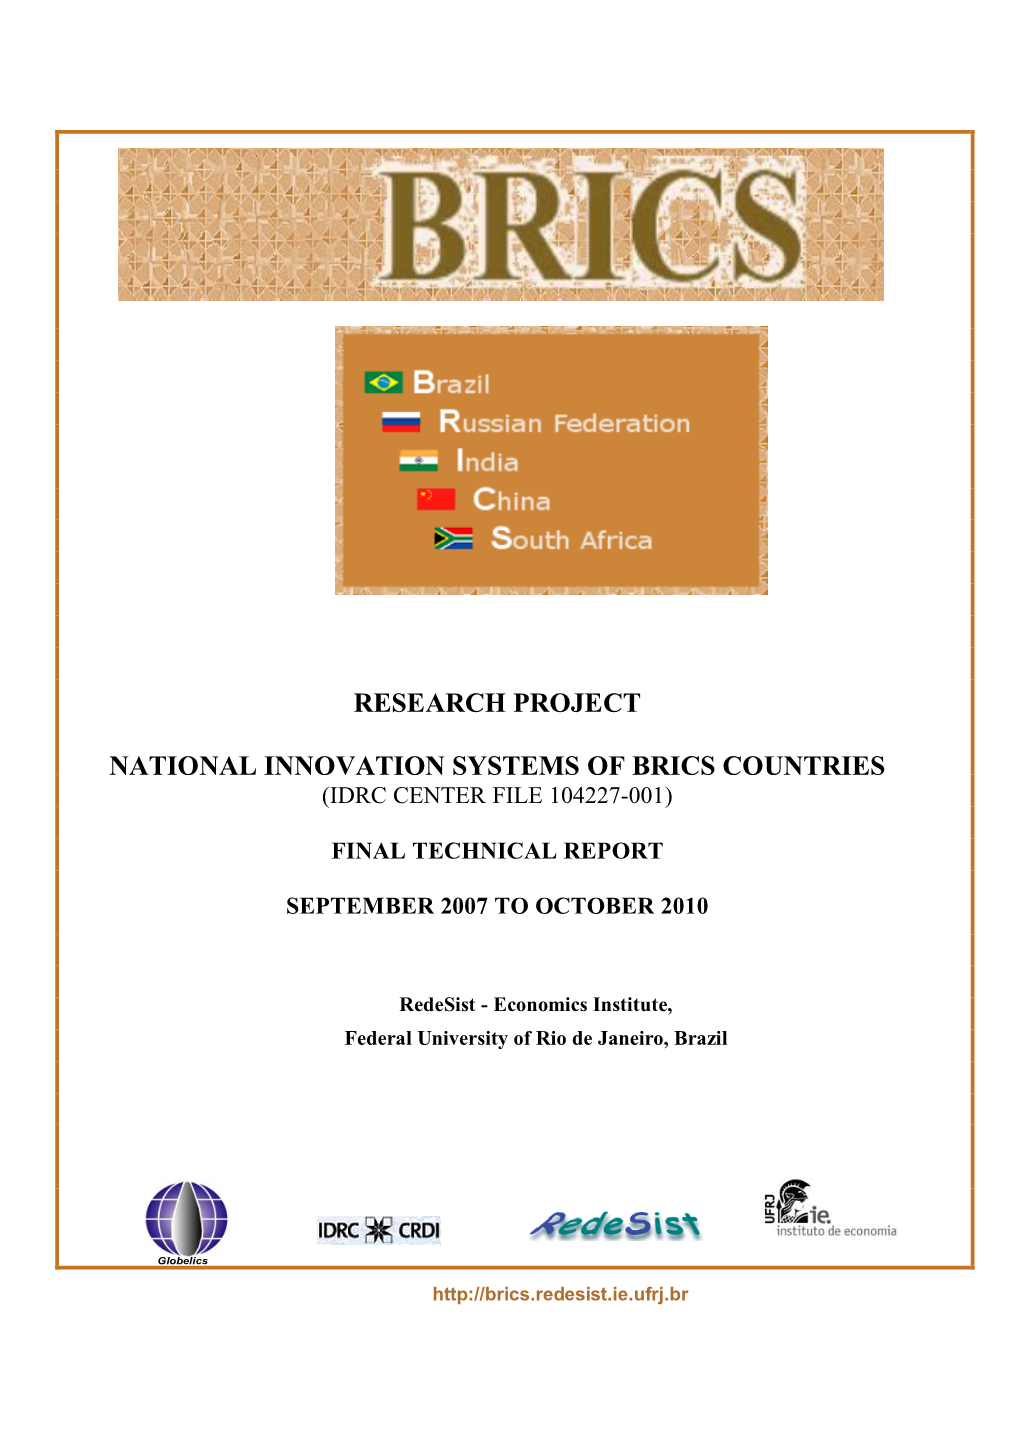 RESEARCH PROJECT NATIONAL INNOVATION SYSTEMS of BRICS COUNTRIES IDRC Center File: 104227-001